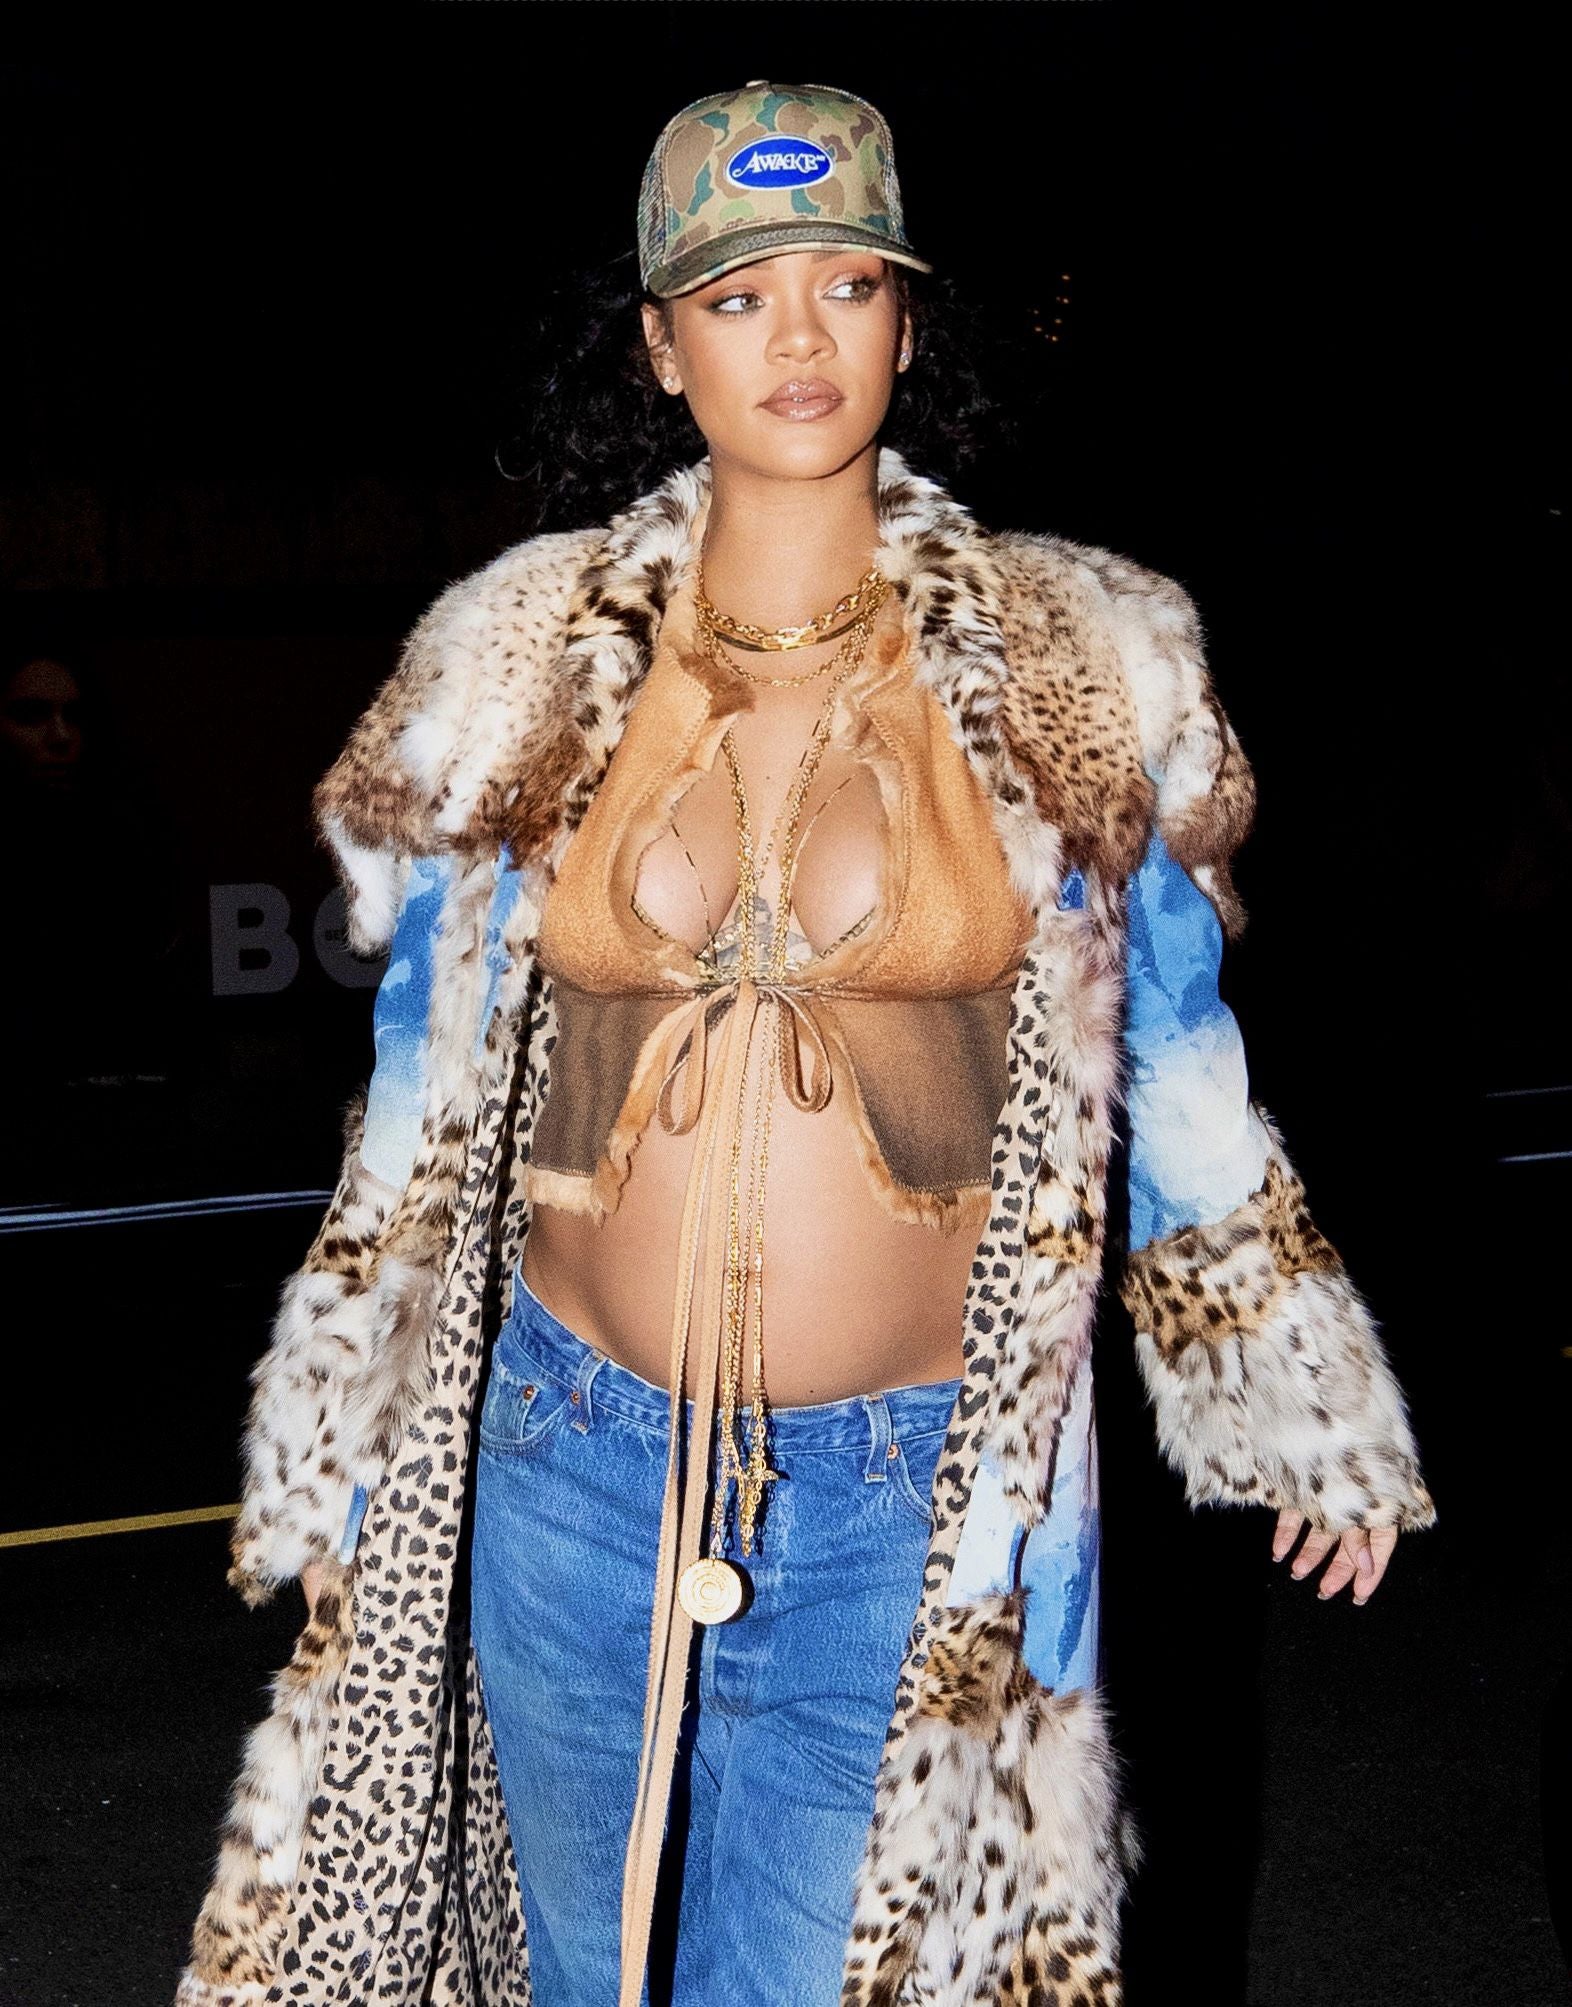 Rihanna unleashes her wild side as she drapes her growing baby bump in fur coat for dinner